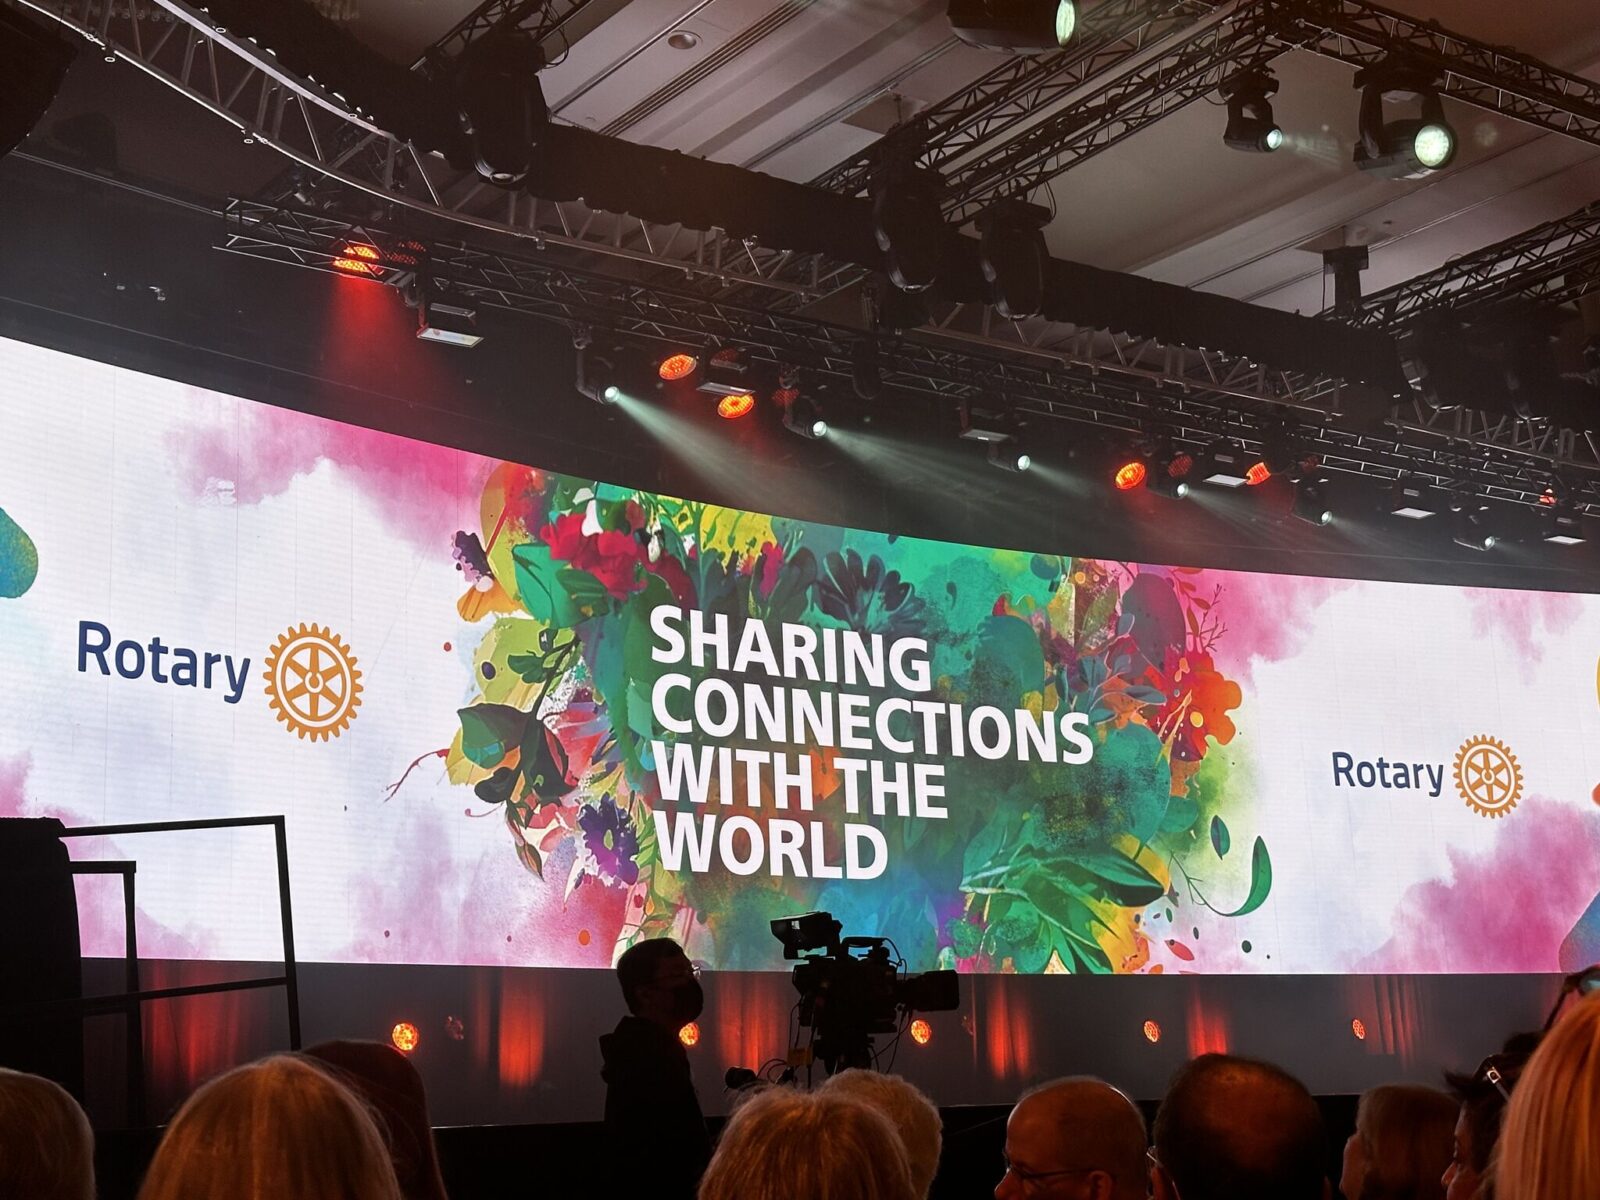 Rotary global summit in Singapore